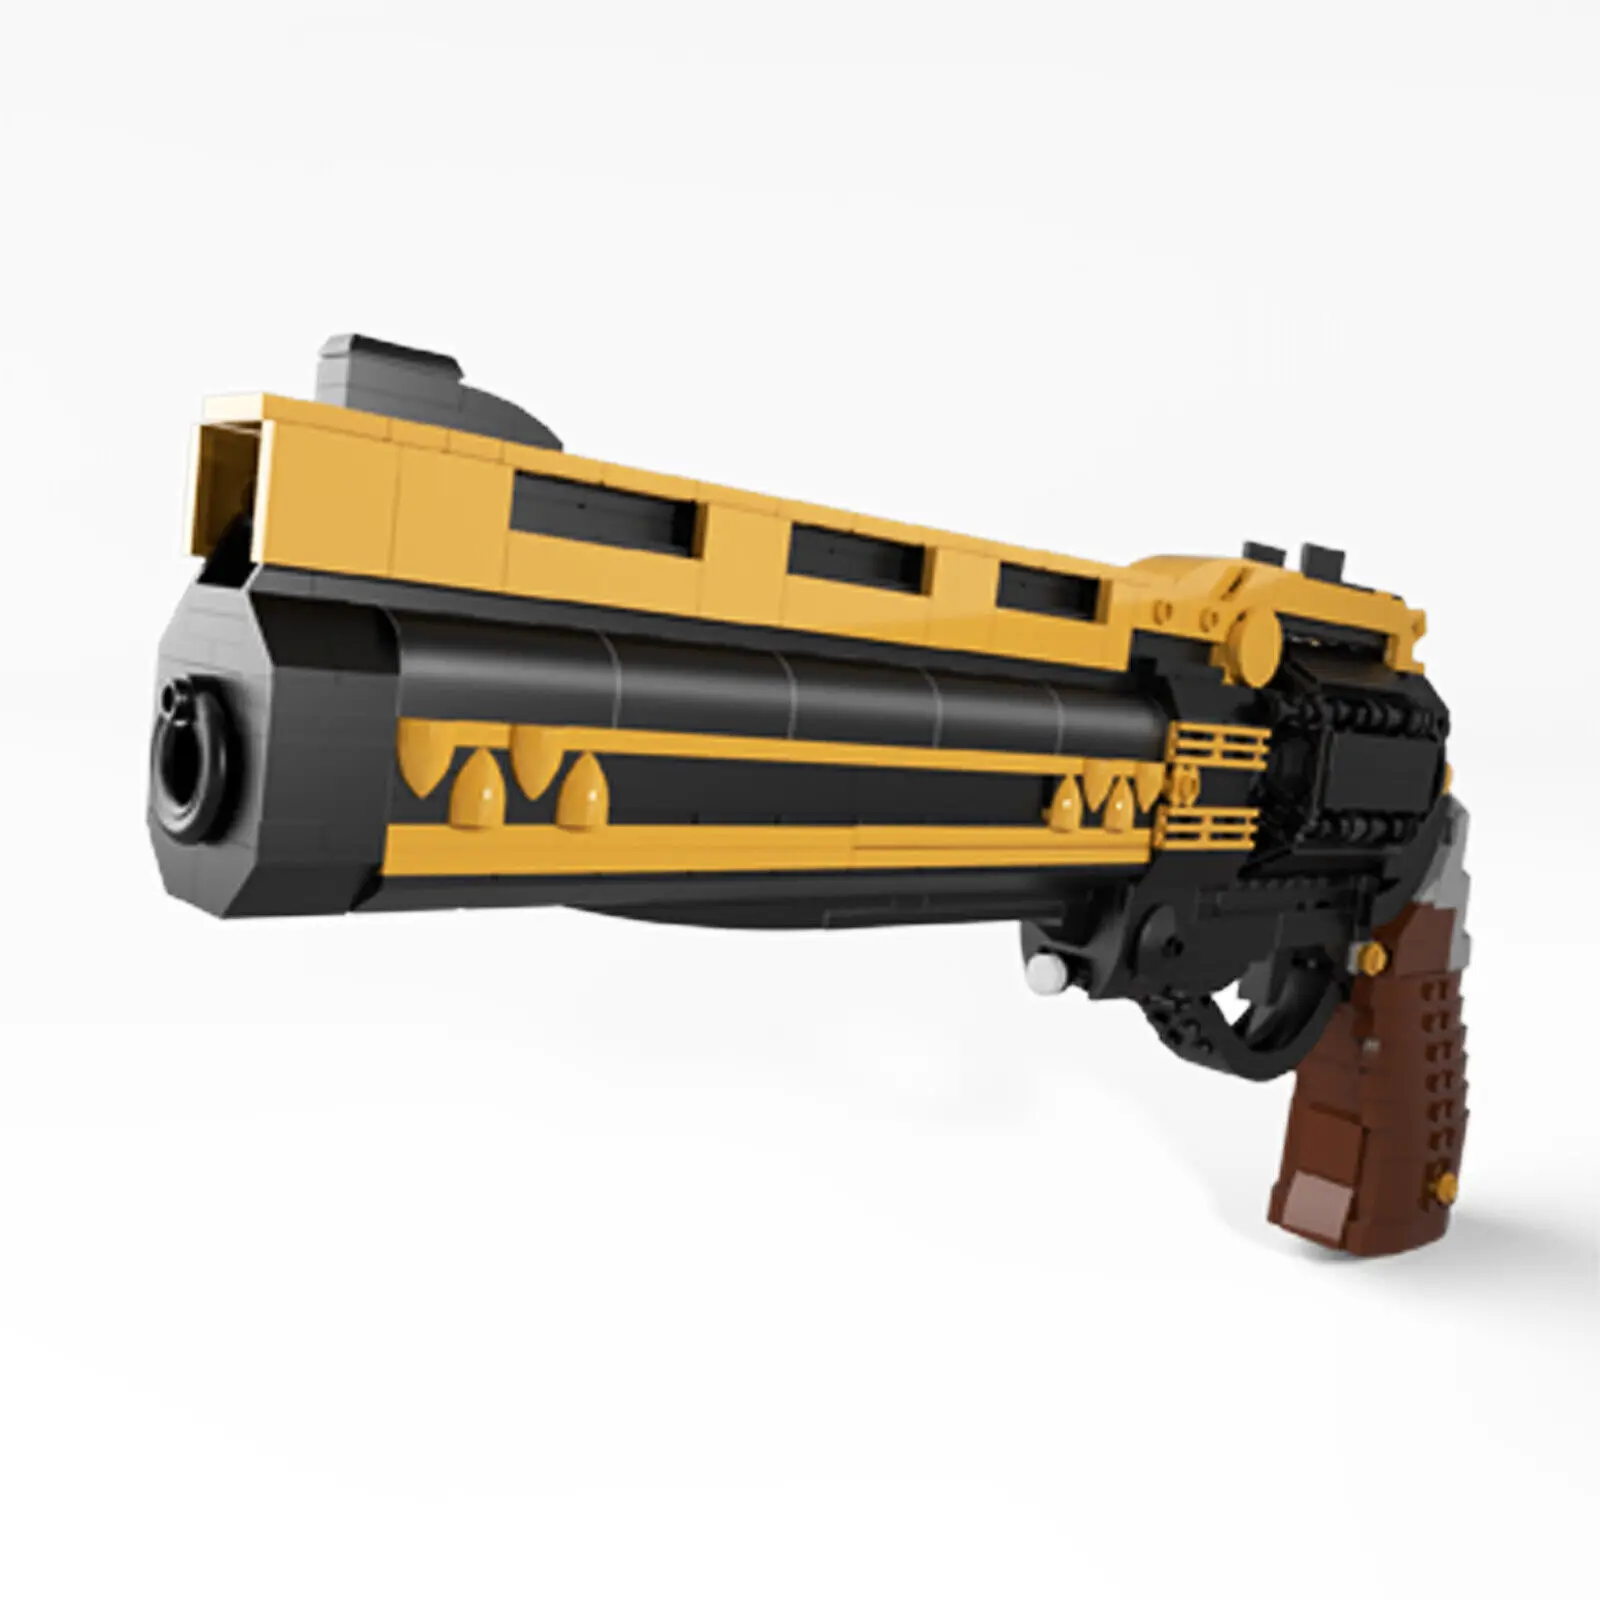 

Cannon with Stand 840 Pieces from First-person Shooter Video Game MOC Build